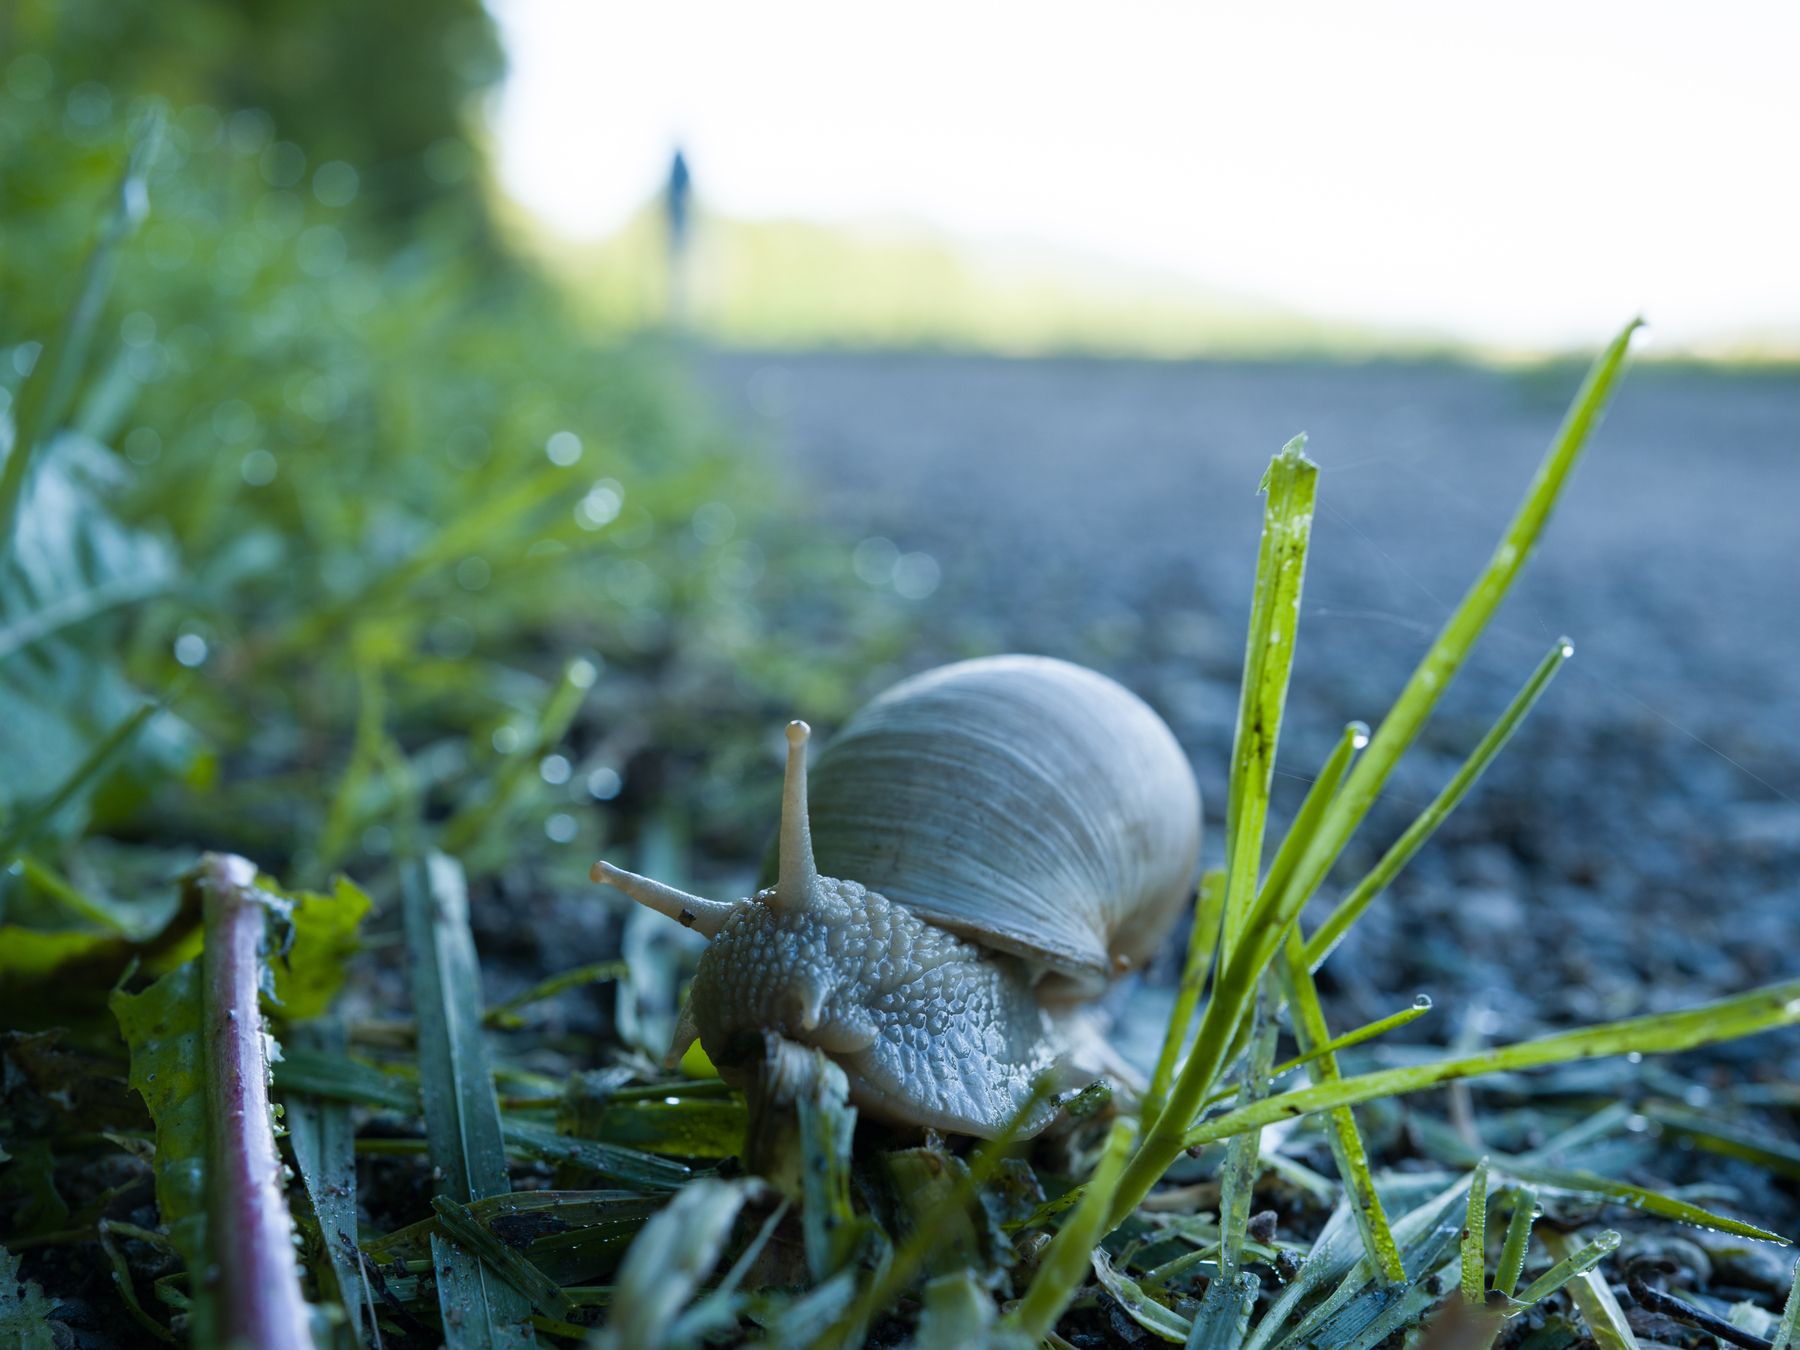 Vineyard snail eating grass by the wayside. 